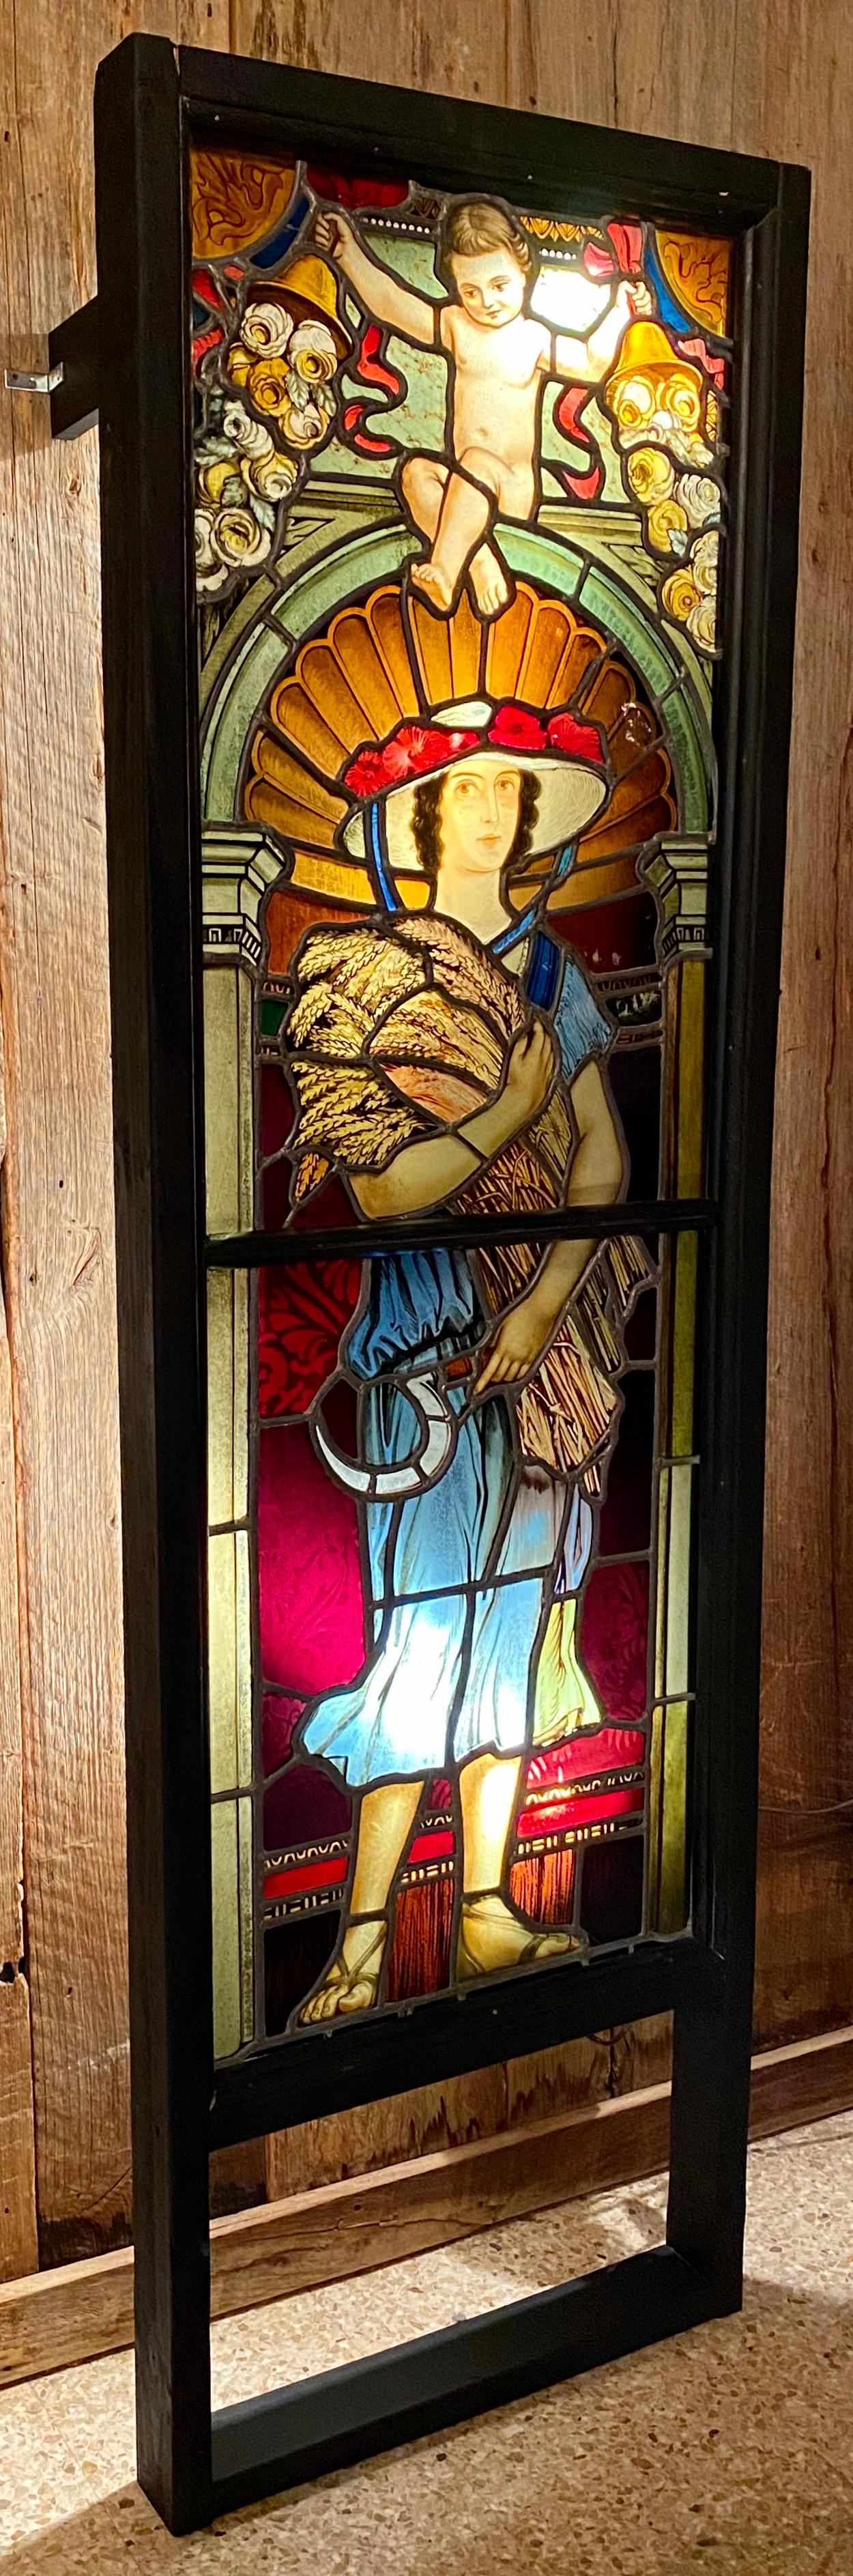 Antique hand painted 19th century stained glass panel window depicting a woman holding a bushel of wheat, circa 1900.
A perfect example of painted stained glass—small glass pieces vibrantly colored with metallic minerals (cobalt for blue, gold for